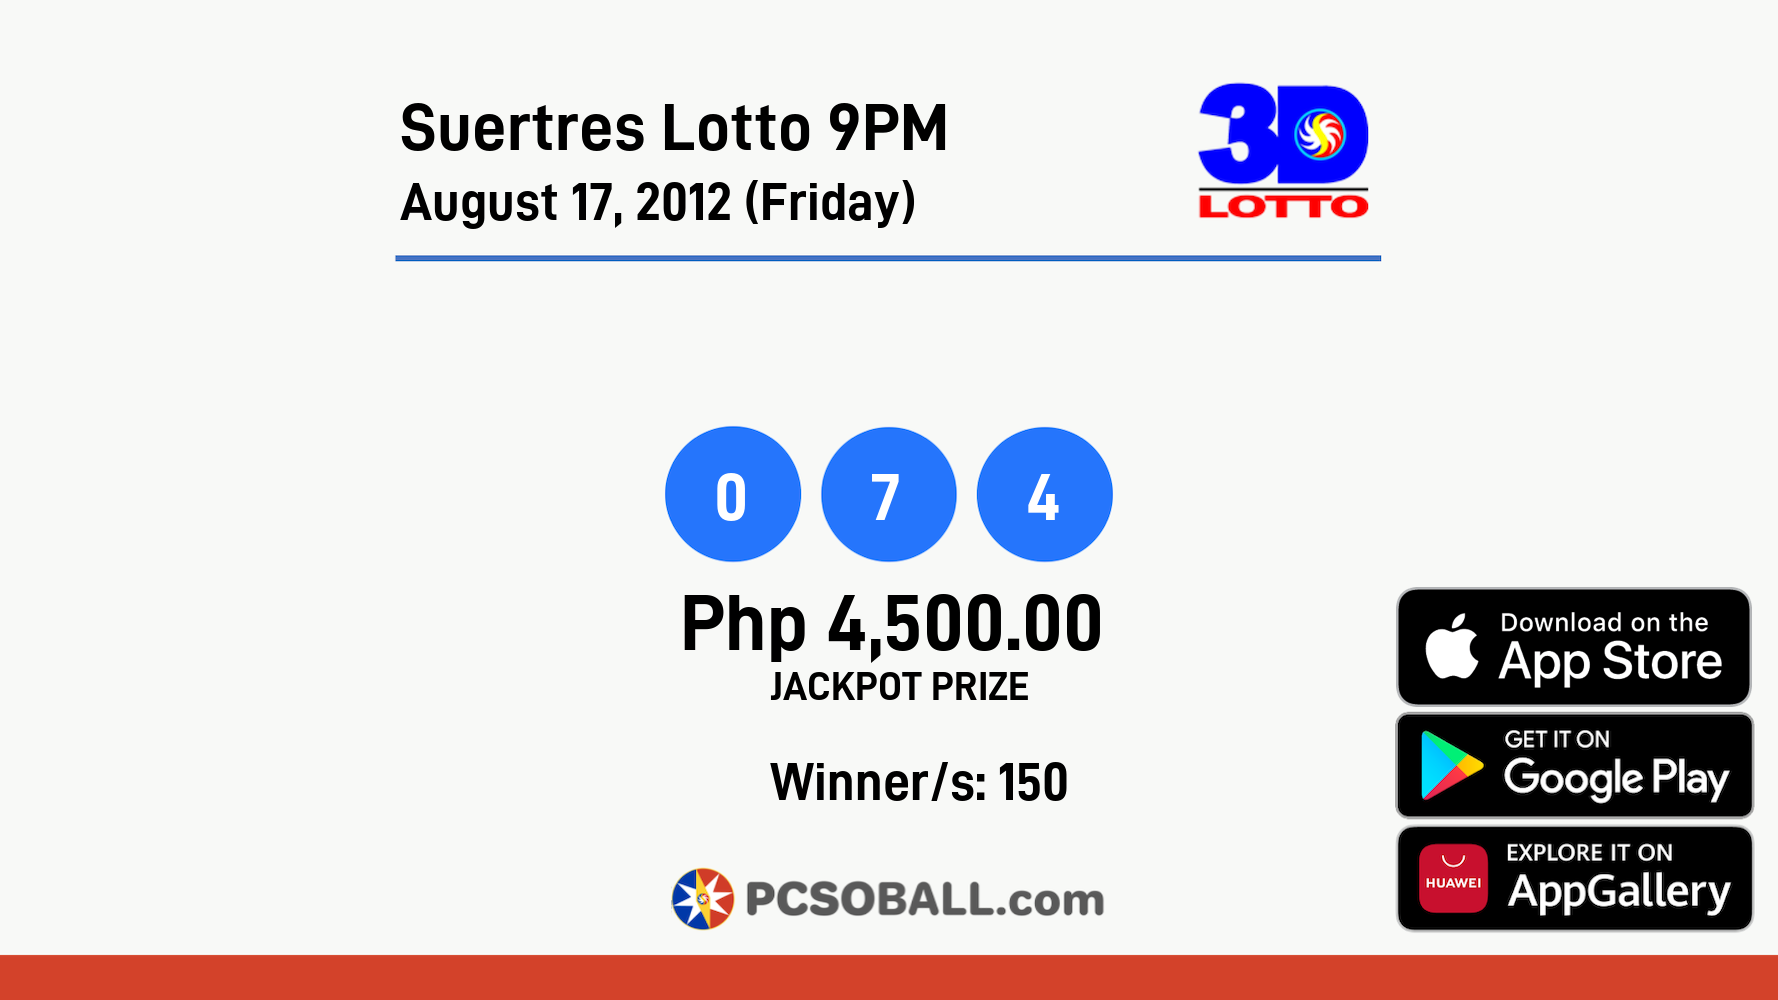 Suertres Lotto 9PM August 17, 2012 (Friday) Result